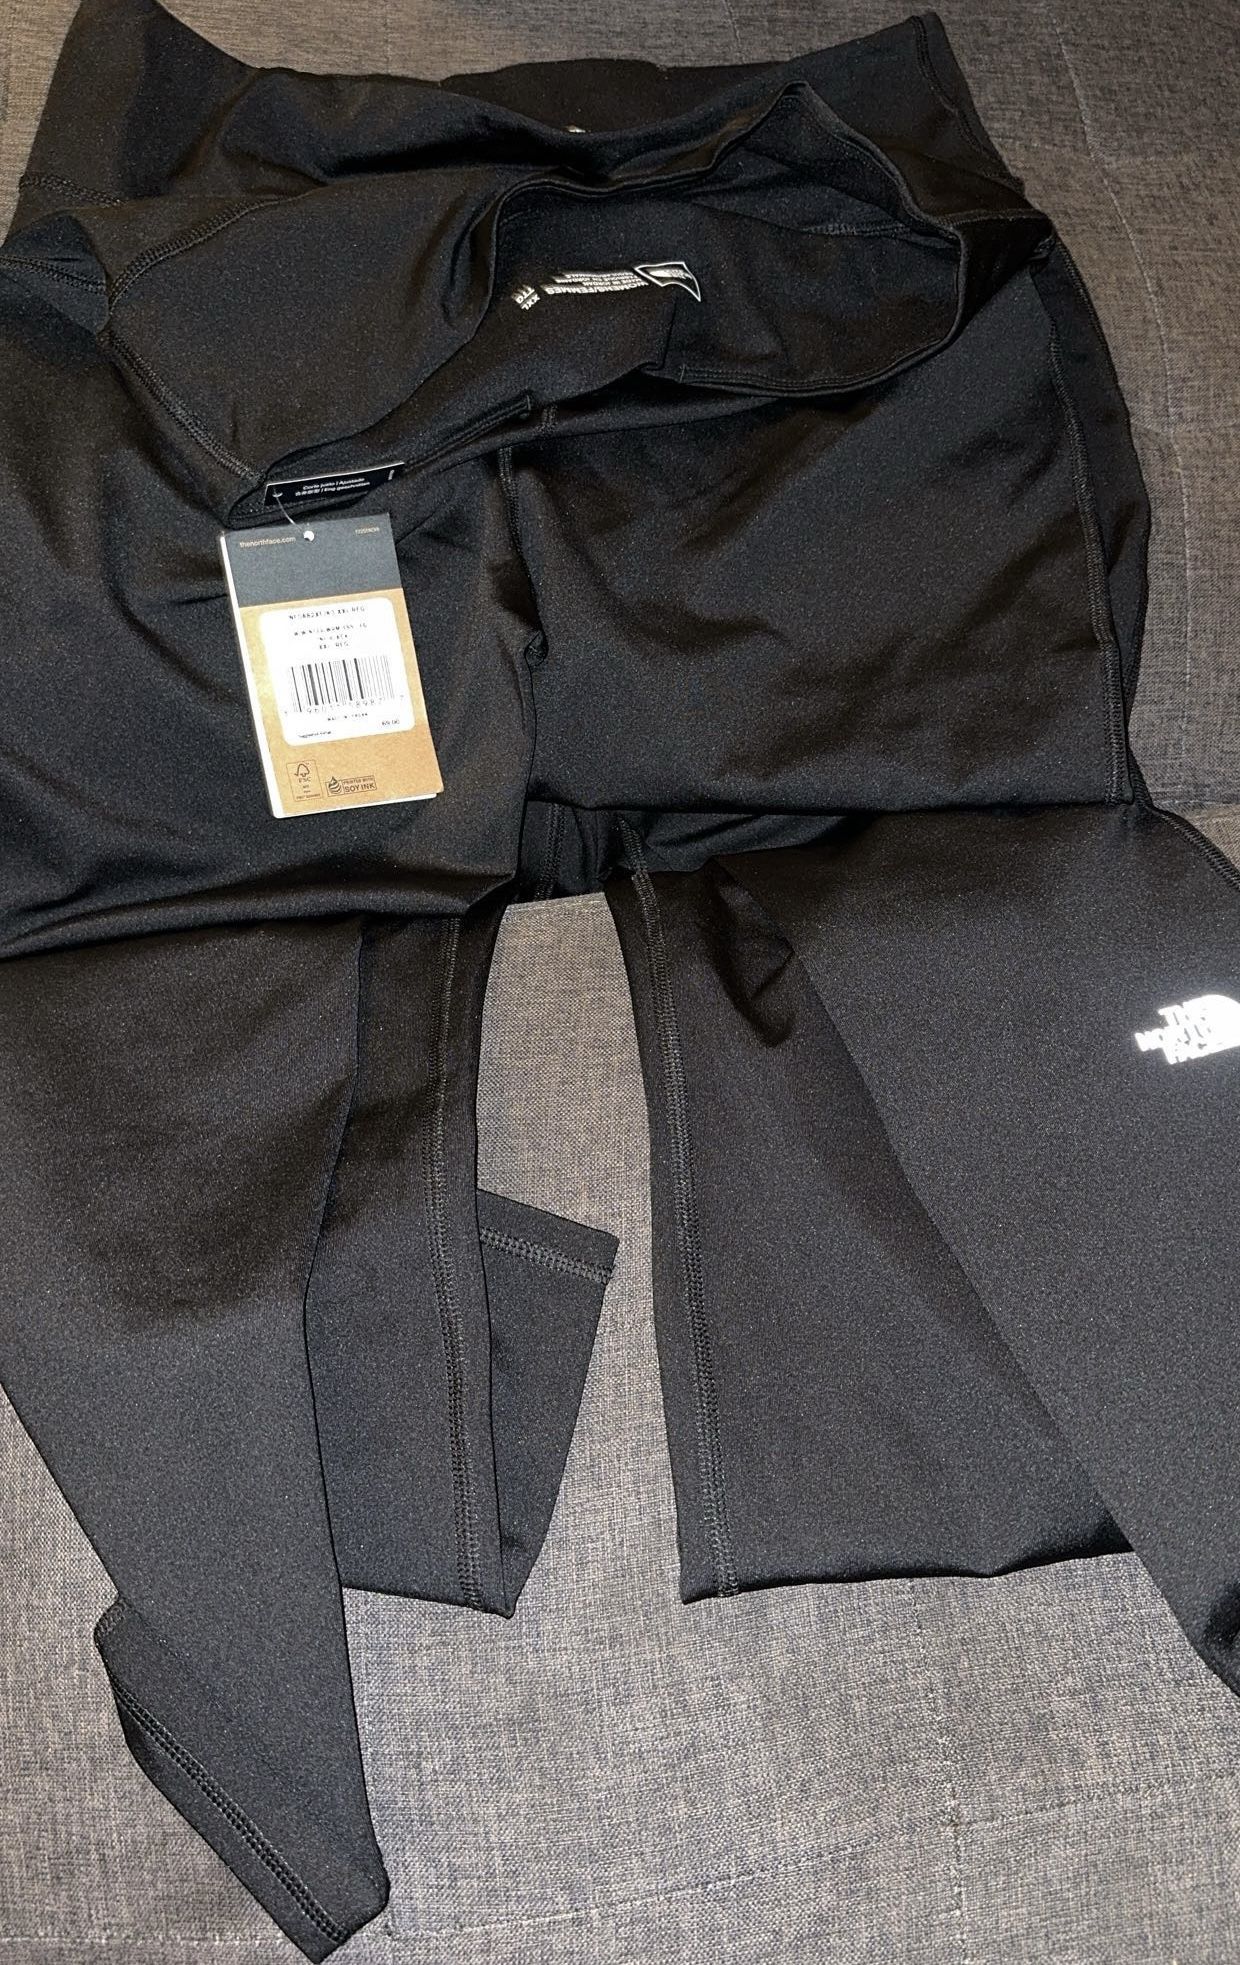 North face Leggings New 80$ For Both 